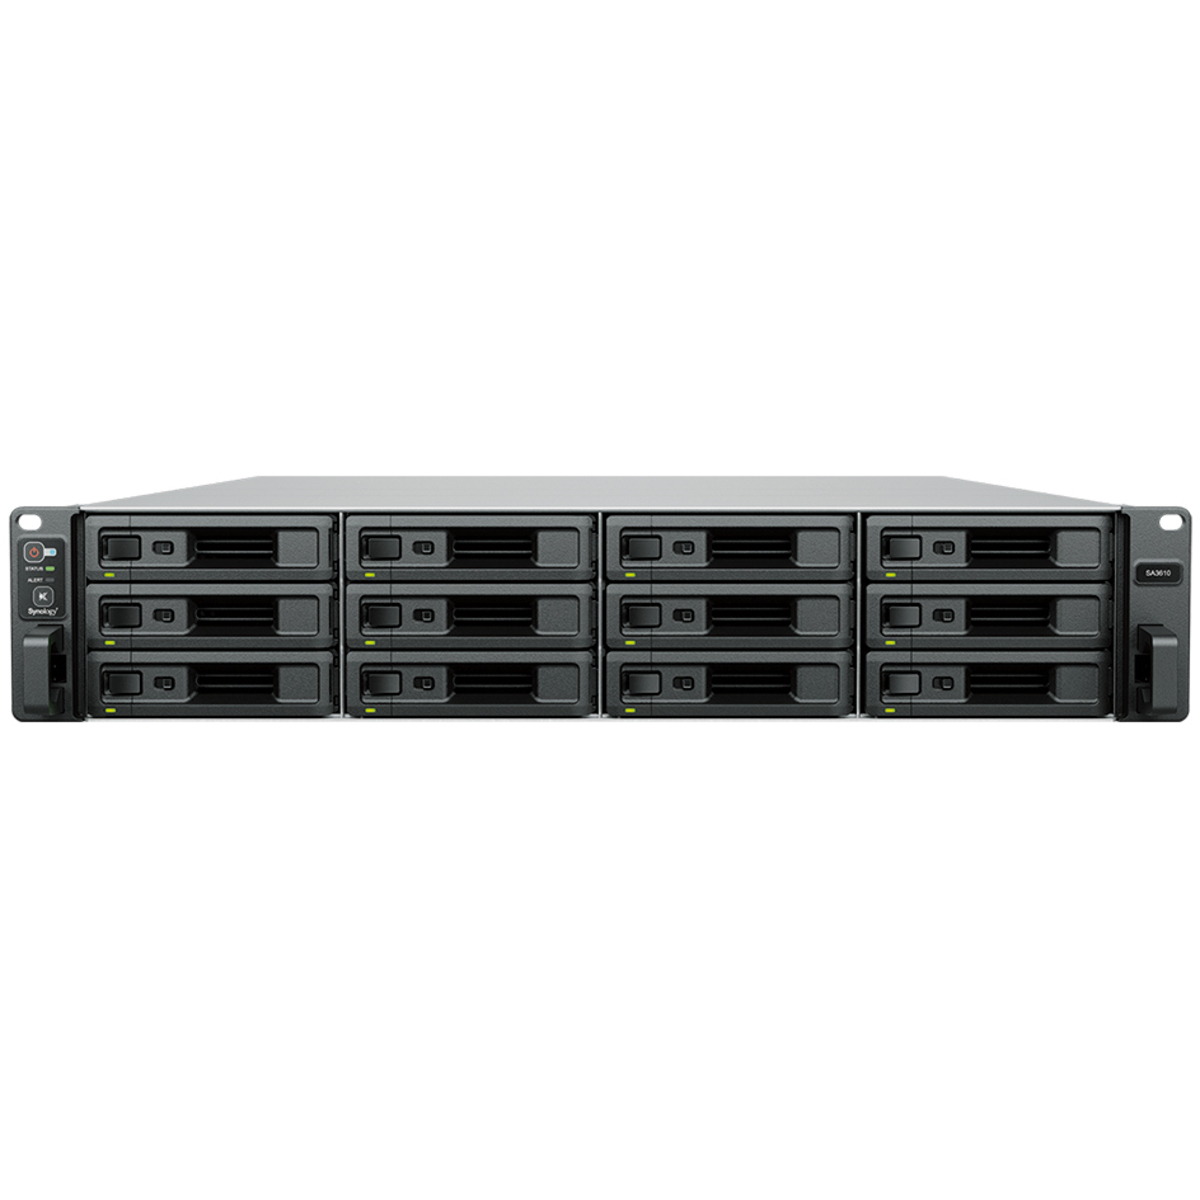 Synology RackStation SA3410 40tb 12-Bay RackMount Large Business / Enterprise NAS - Network Attached Storage Device 10x4tb Western Digital Red SA500 WDS400T1R0A 2.5 560/530MB/s SATA 6Gb/s SSD NAS Class Drives Installed - Burn-In Tested RackStation SA3410